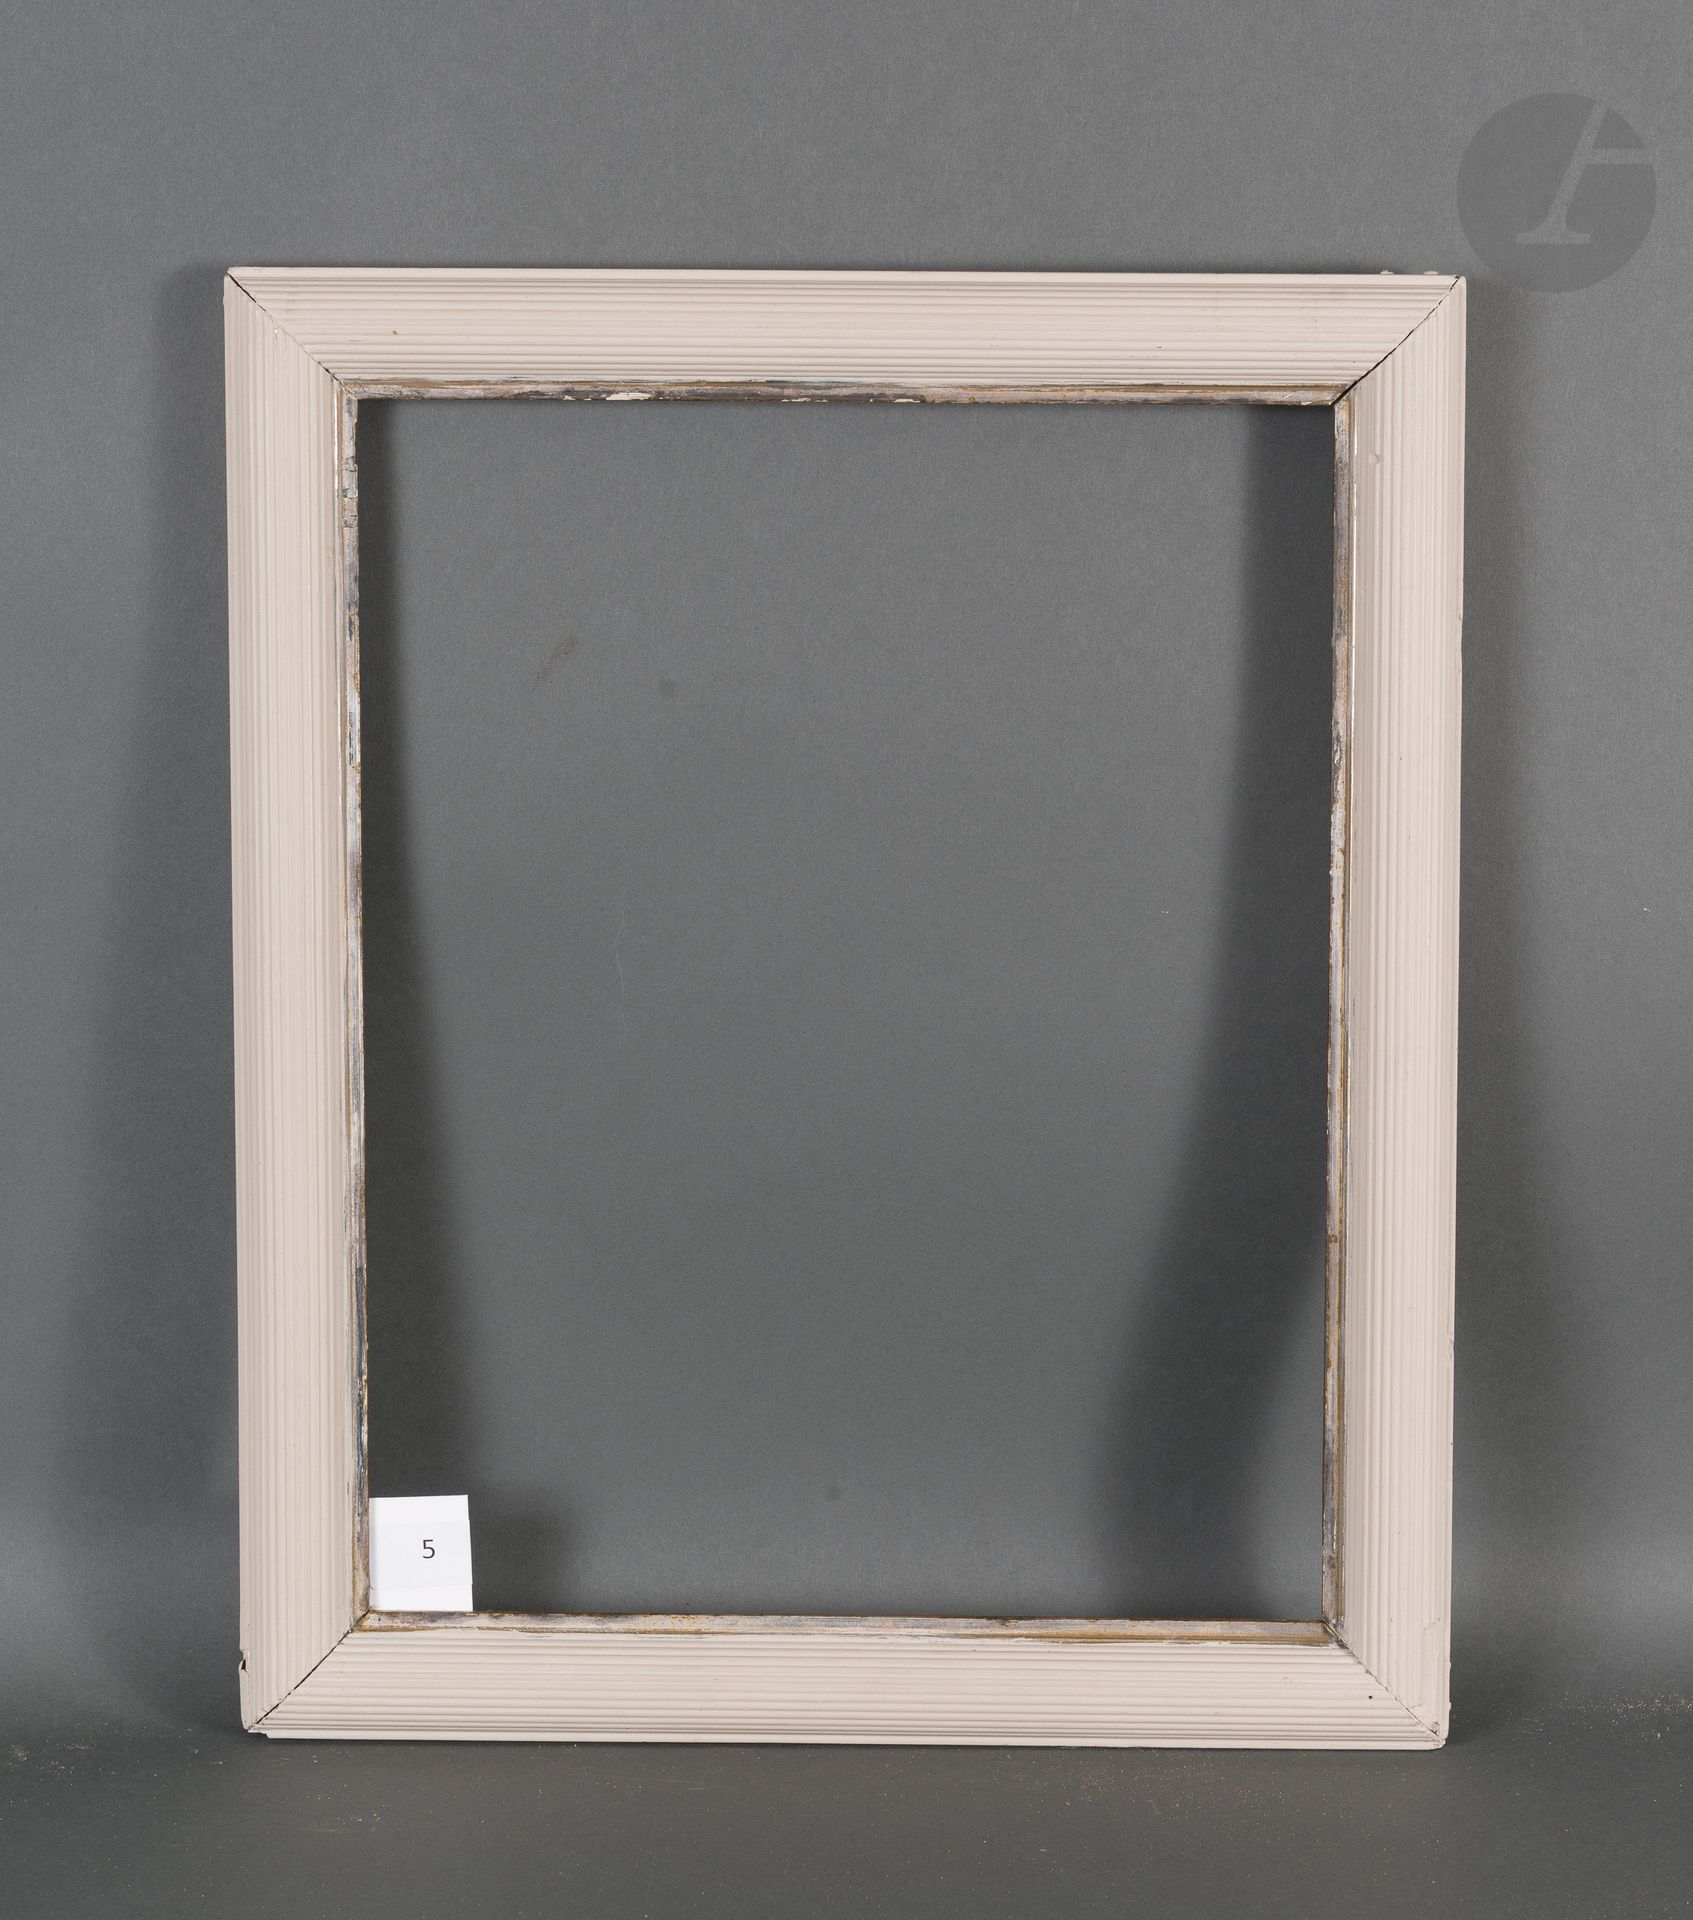 Null Degas style frame in molded wood and painted stucco, silvered on the view.
&hellip;